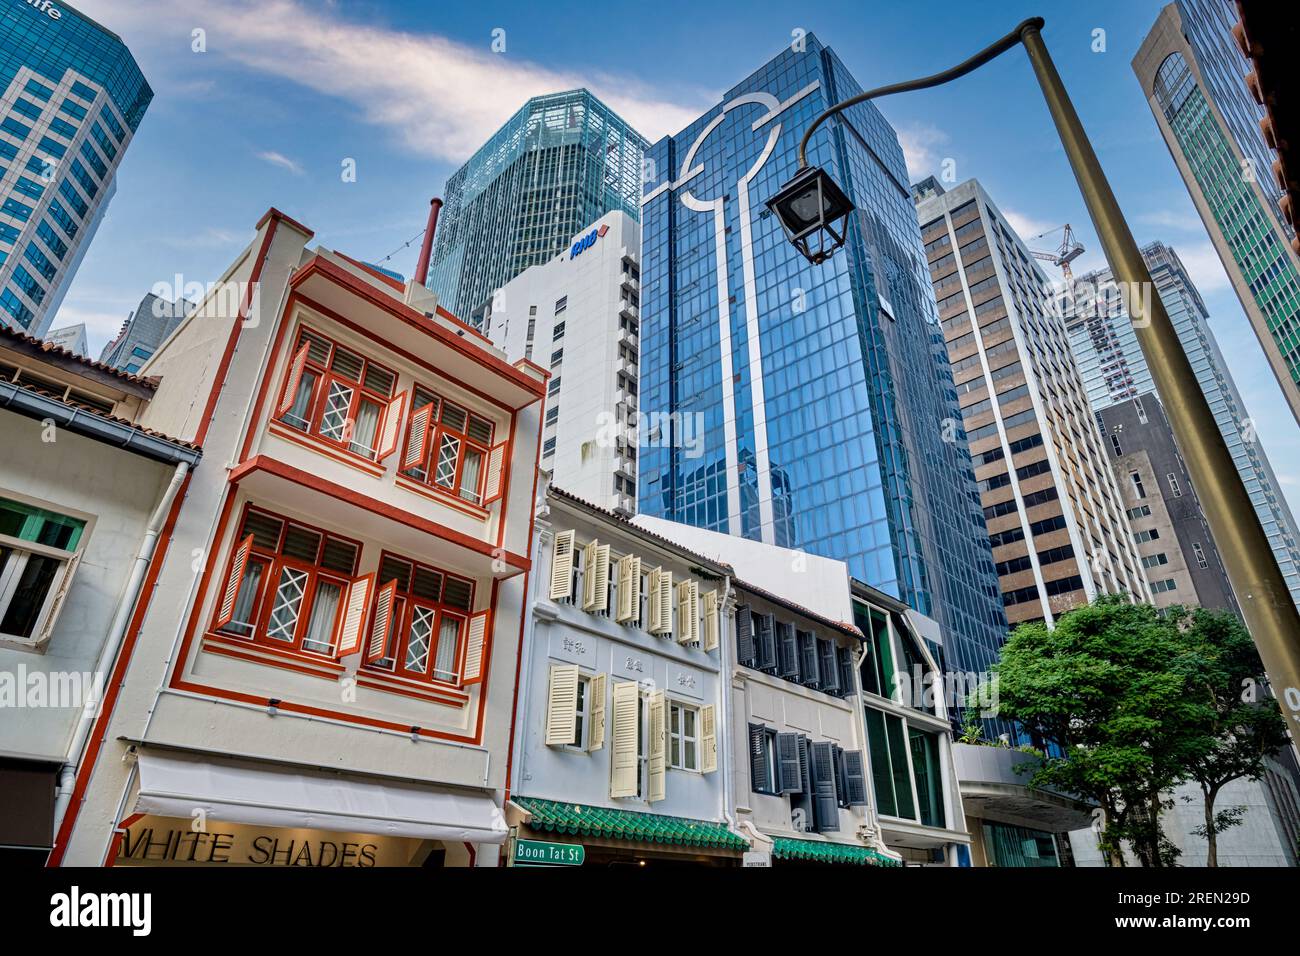 Traditional-style old Chinese shophouses in Boon Tat St., Chinatown, Singapore, with towering high rise office towers in the background Stock Photo